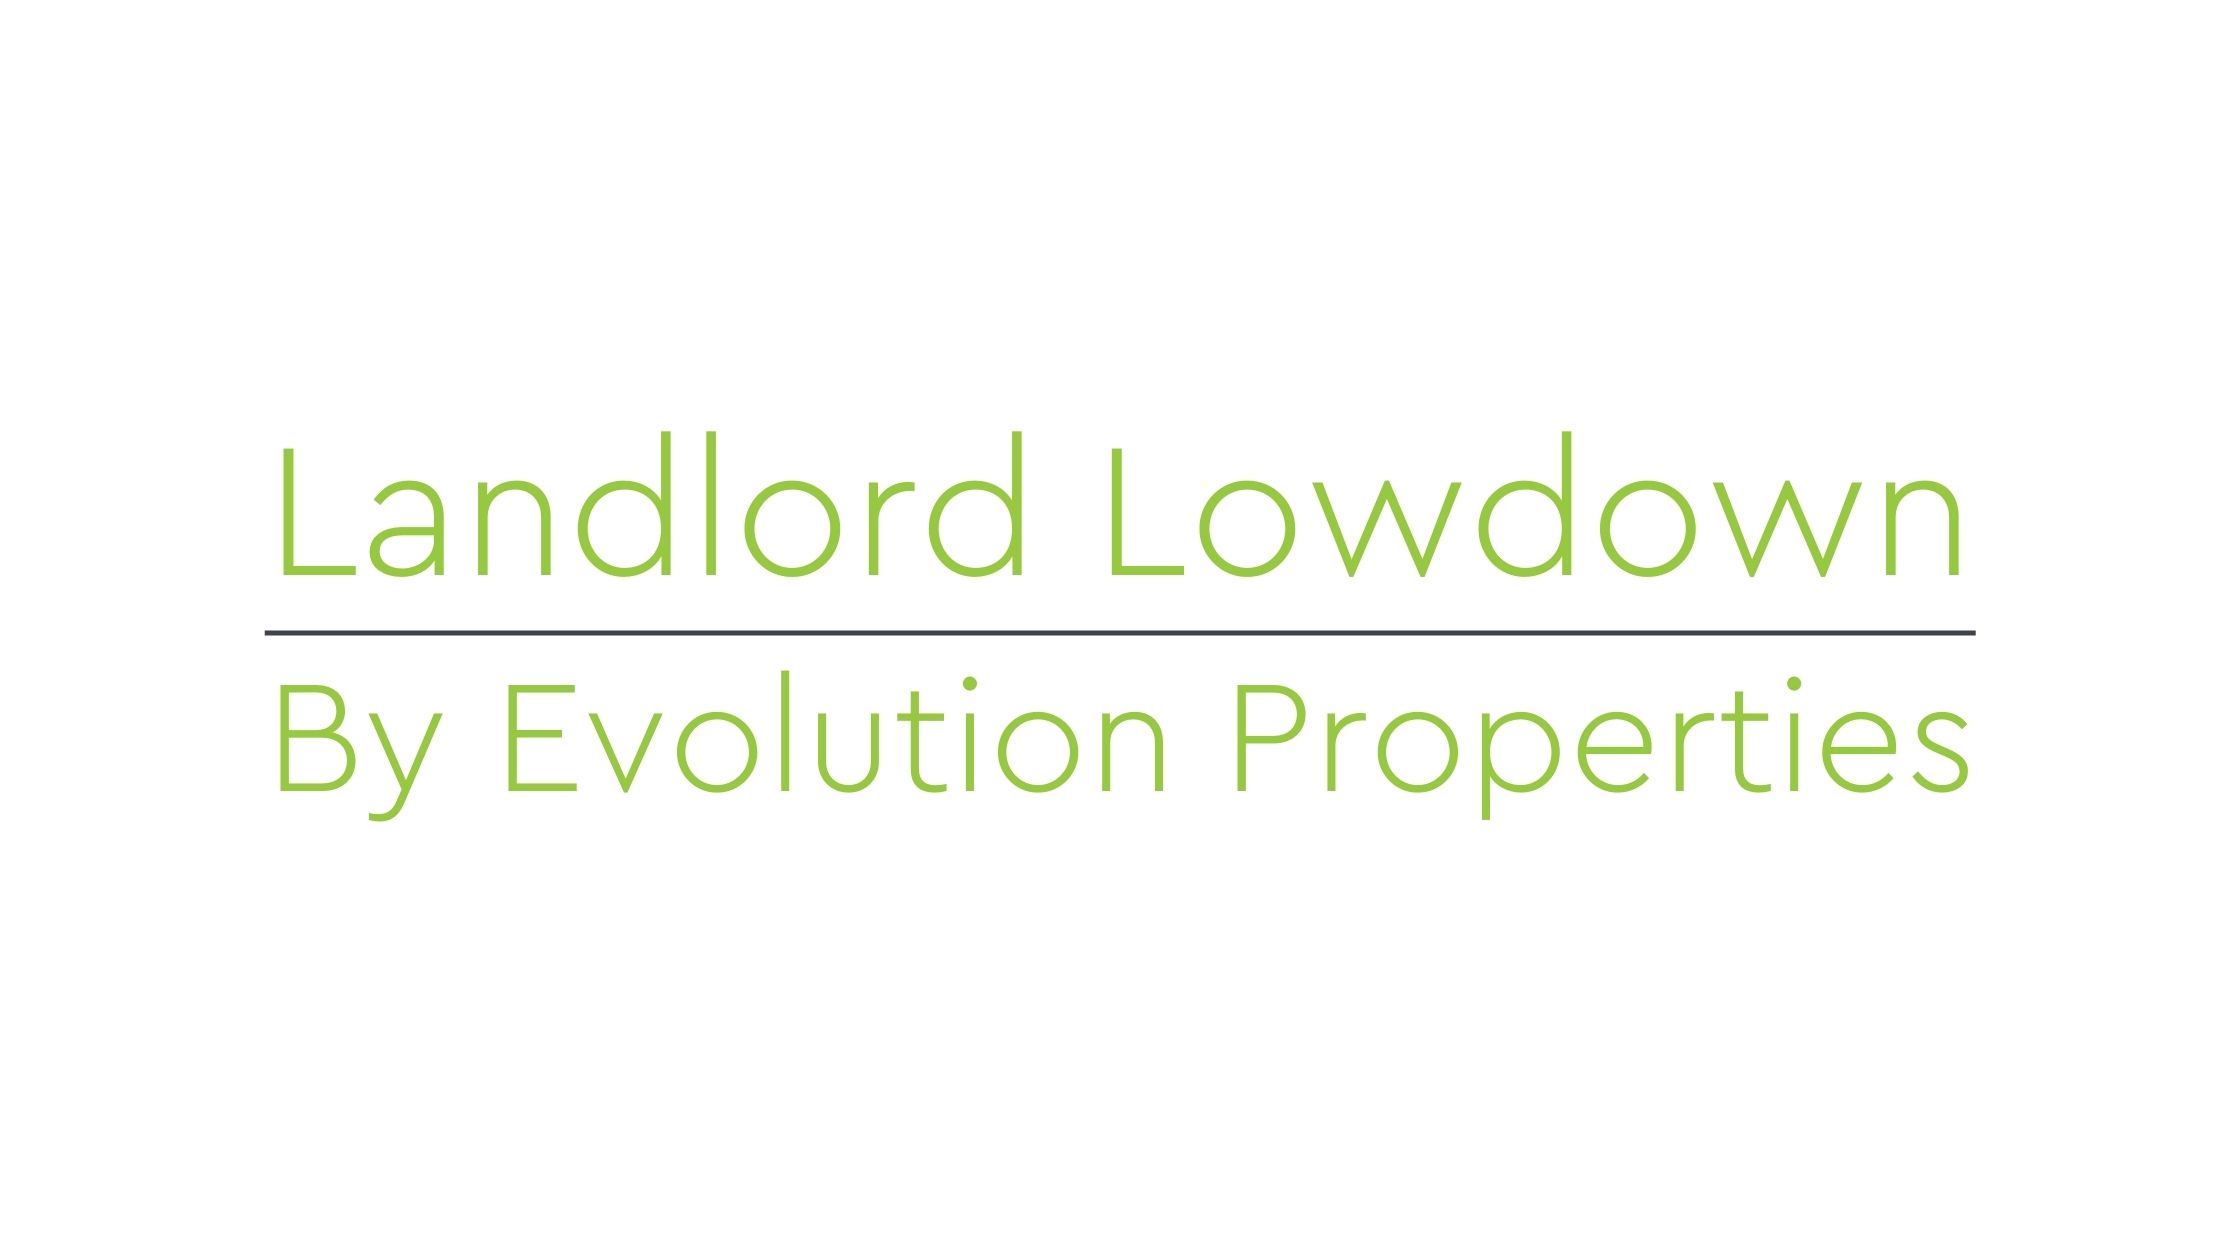 Landlord Lowdown - Keeping up to date!